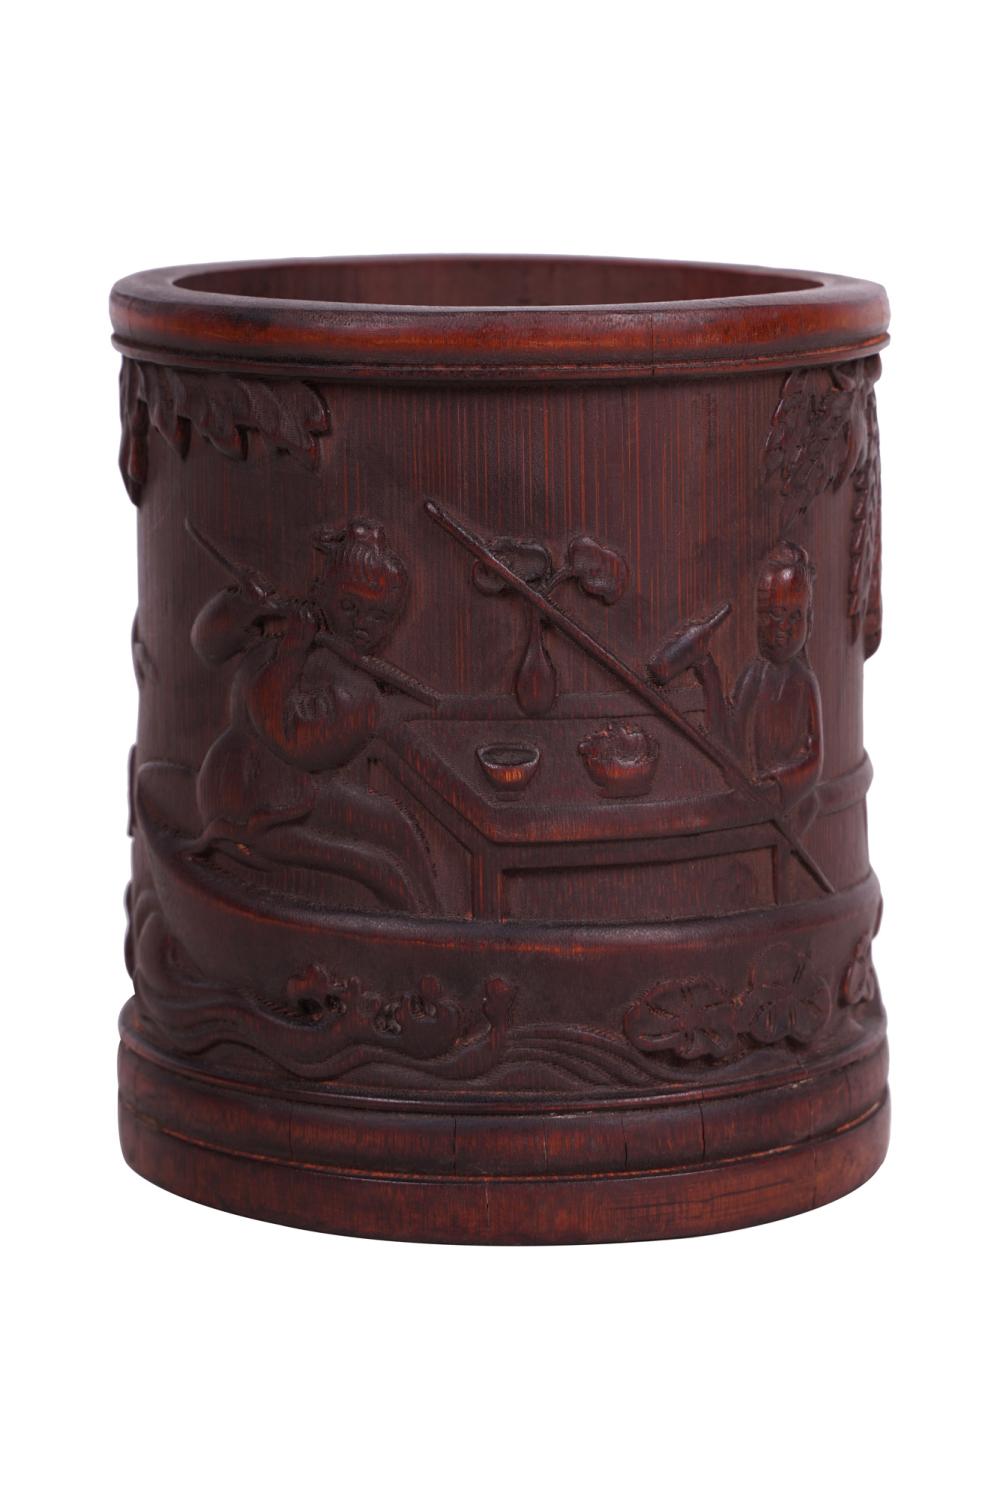 CHINESE CARVED WOOD BRUSH POT5 3360fe